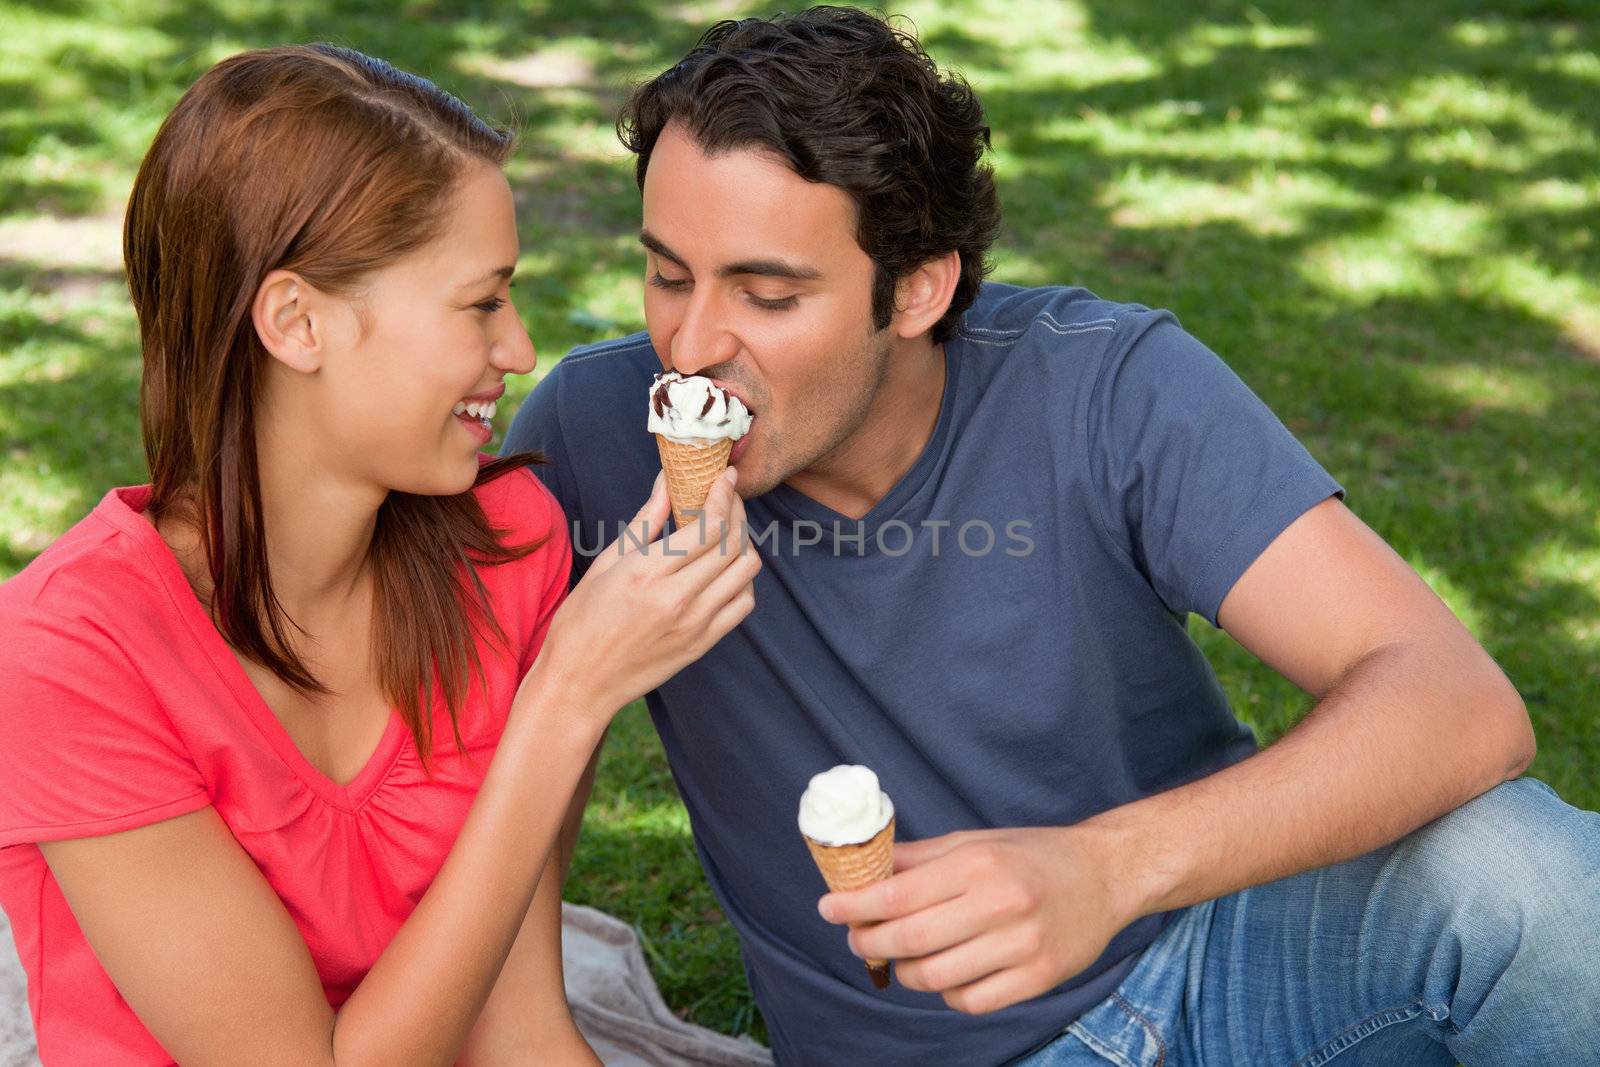 Smiling woman feeding her friend an ice cream cone as they sit next to each other on the grass